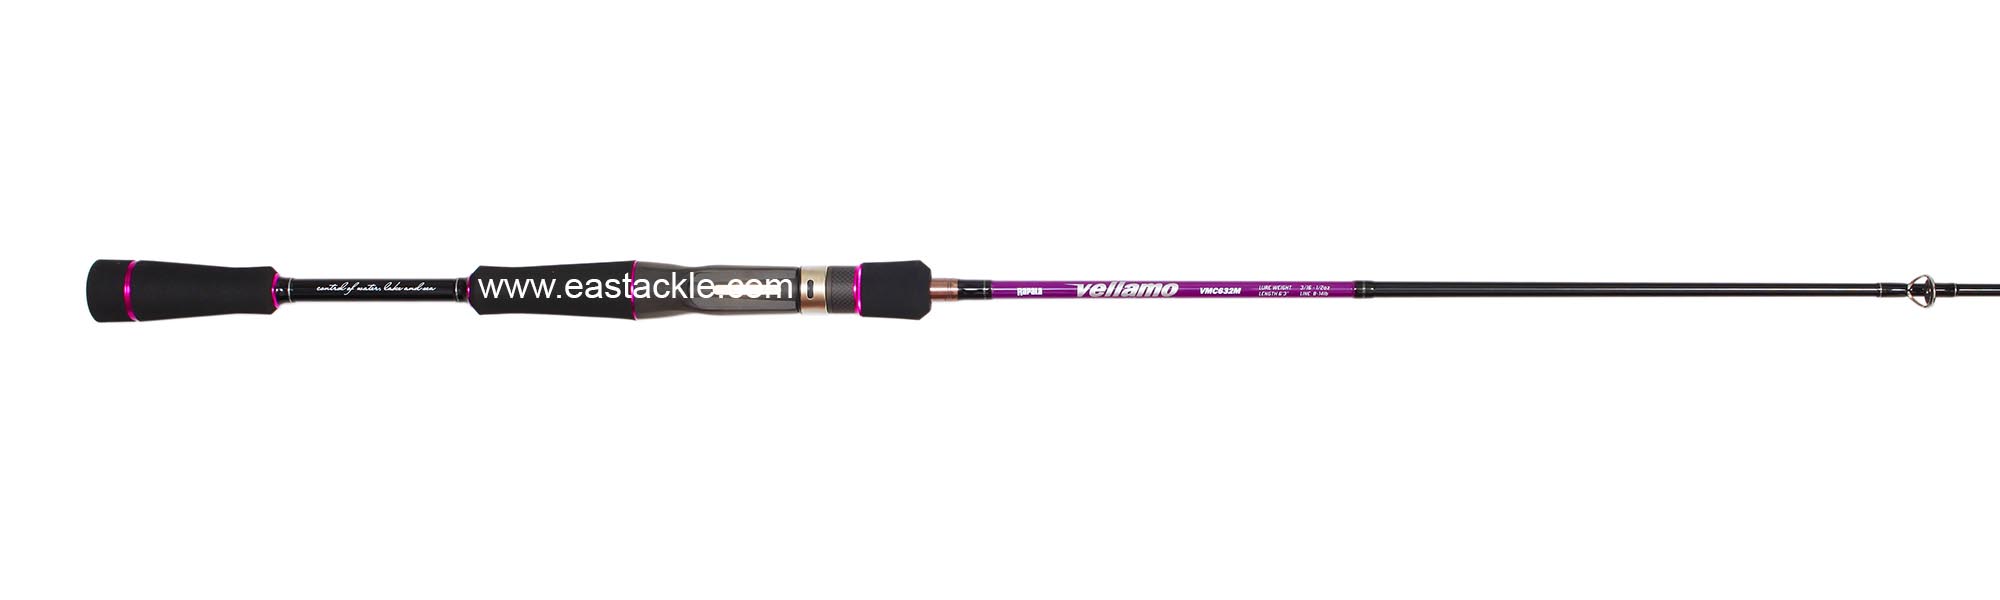 Rapala - Vellamo - VMC632M - Bait Casting Rod - Butt to Stripper Guide (Top View) | Eastackle